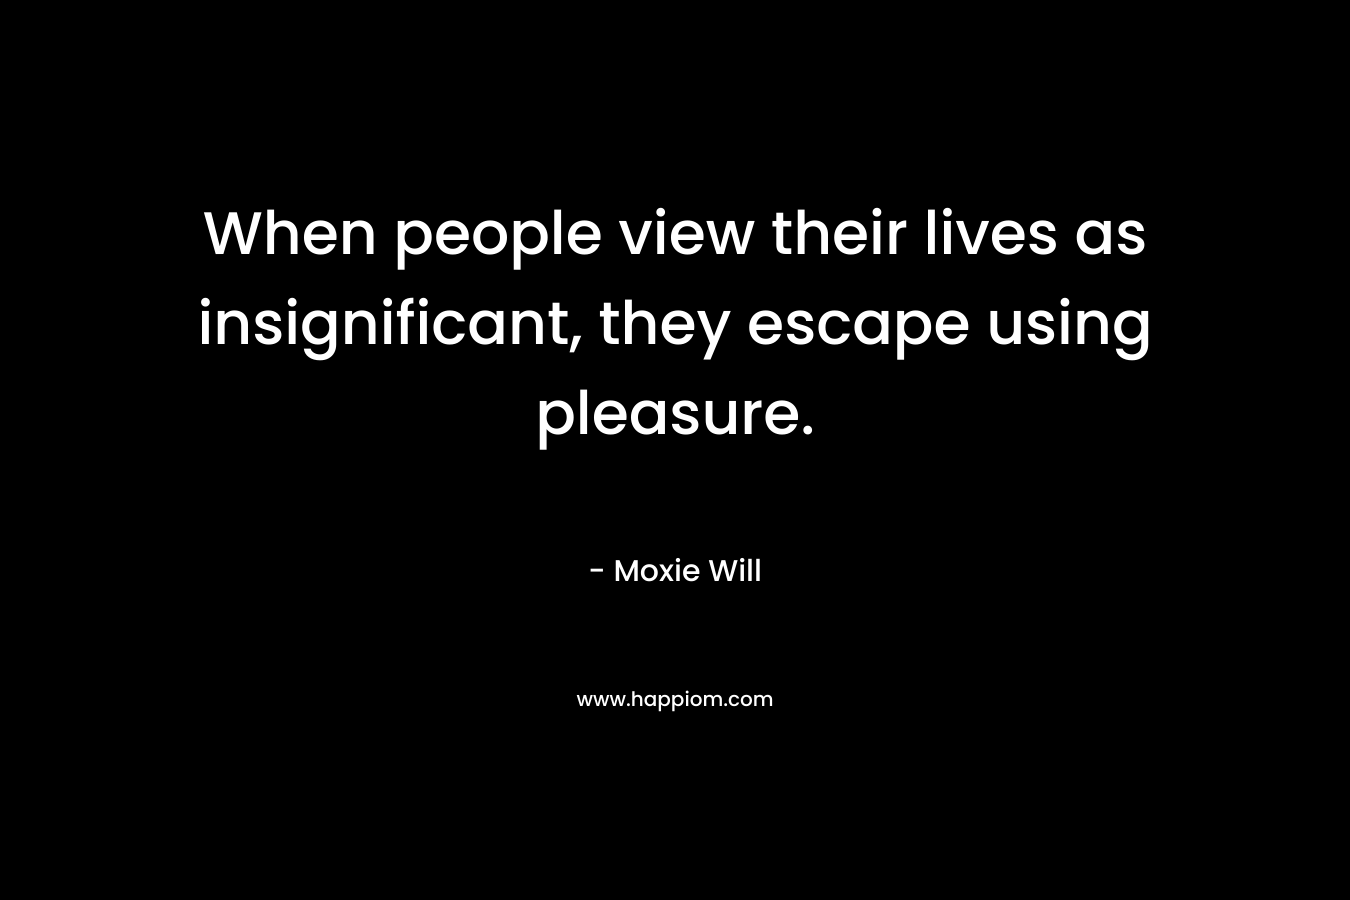 When people view their lives as insignificant, they escape using pleasure. – Moxie Will